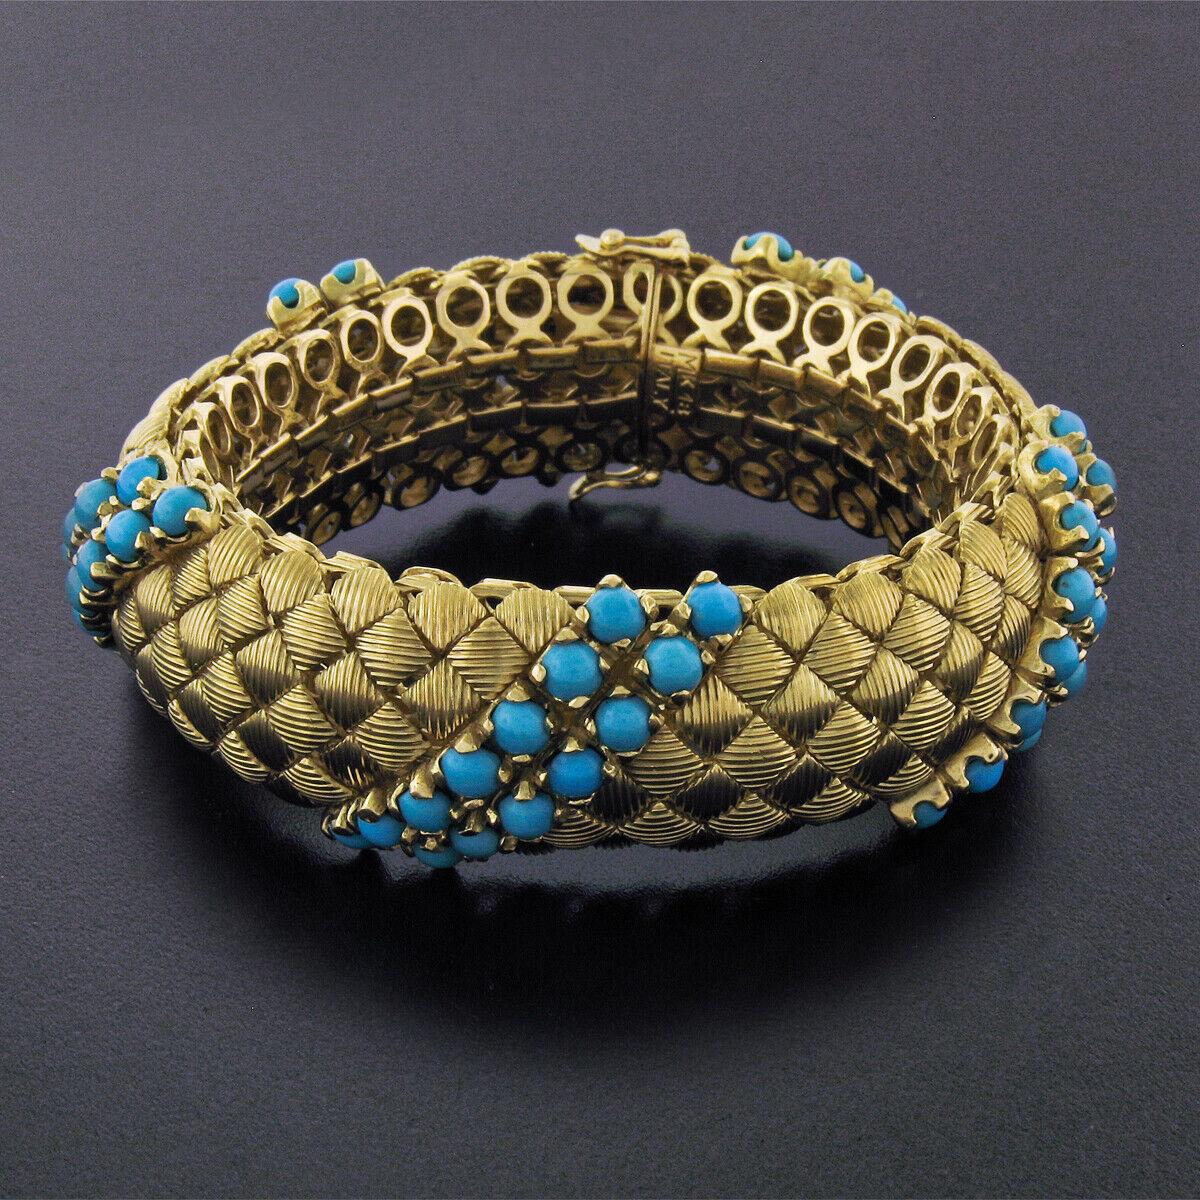 This gorgeous vintage bracelet was crafted in solid 18k yellow gold and features very unique textured square patterns that structure the solid and bold design. Prong set diagonally are dual rows of 70 genuine turquoise stones displaying very